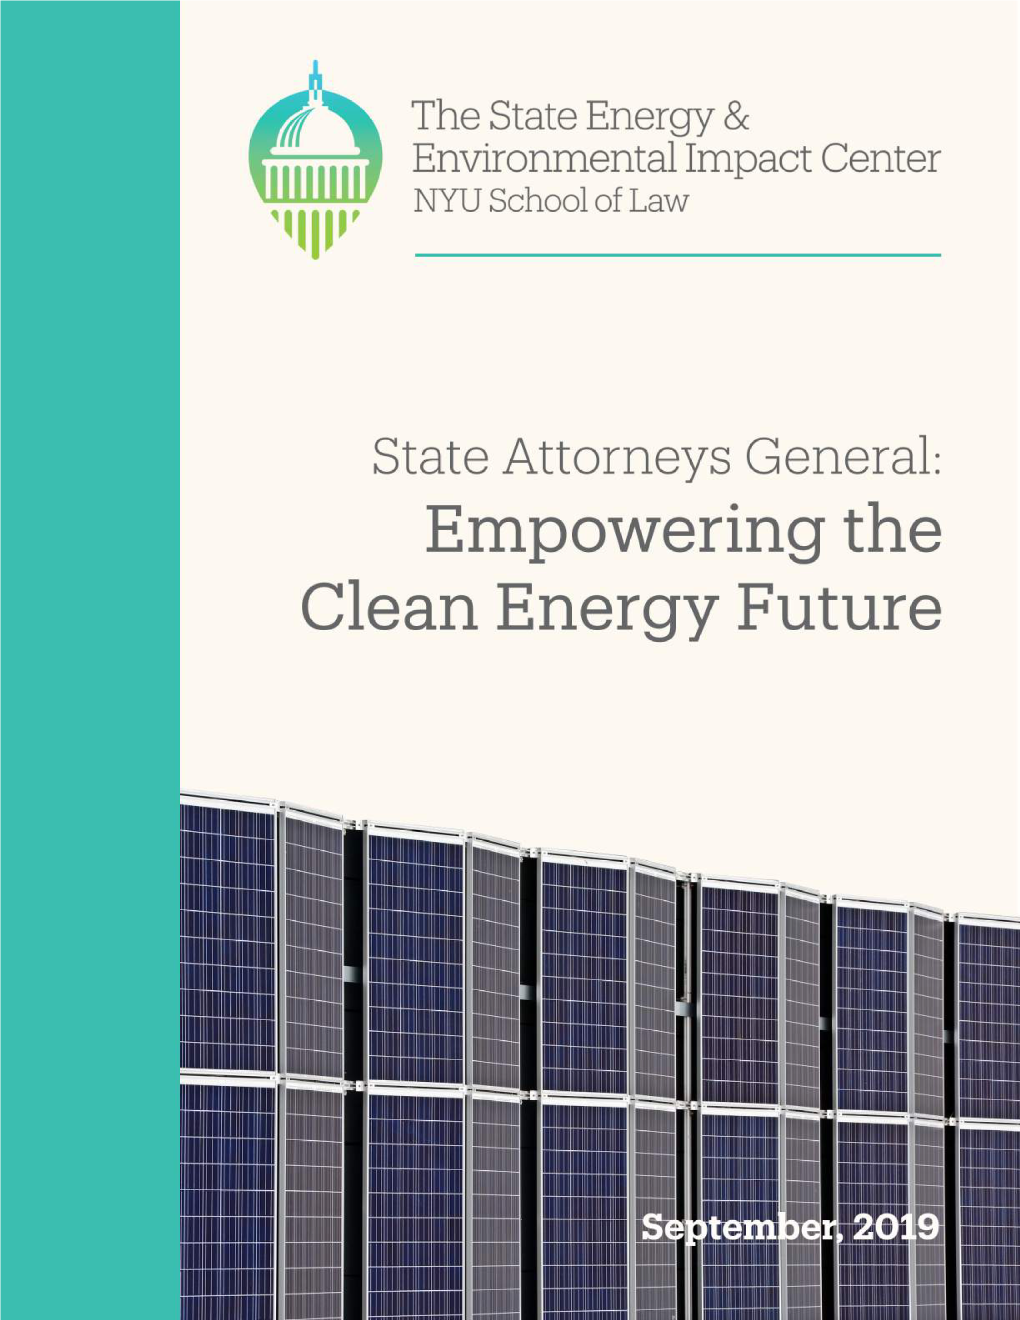 State Attorneys General: Empowering the Clean Energy Future